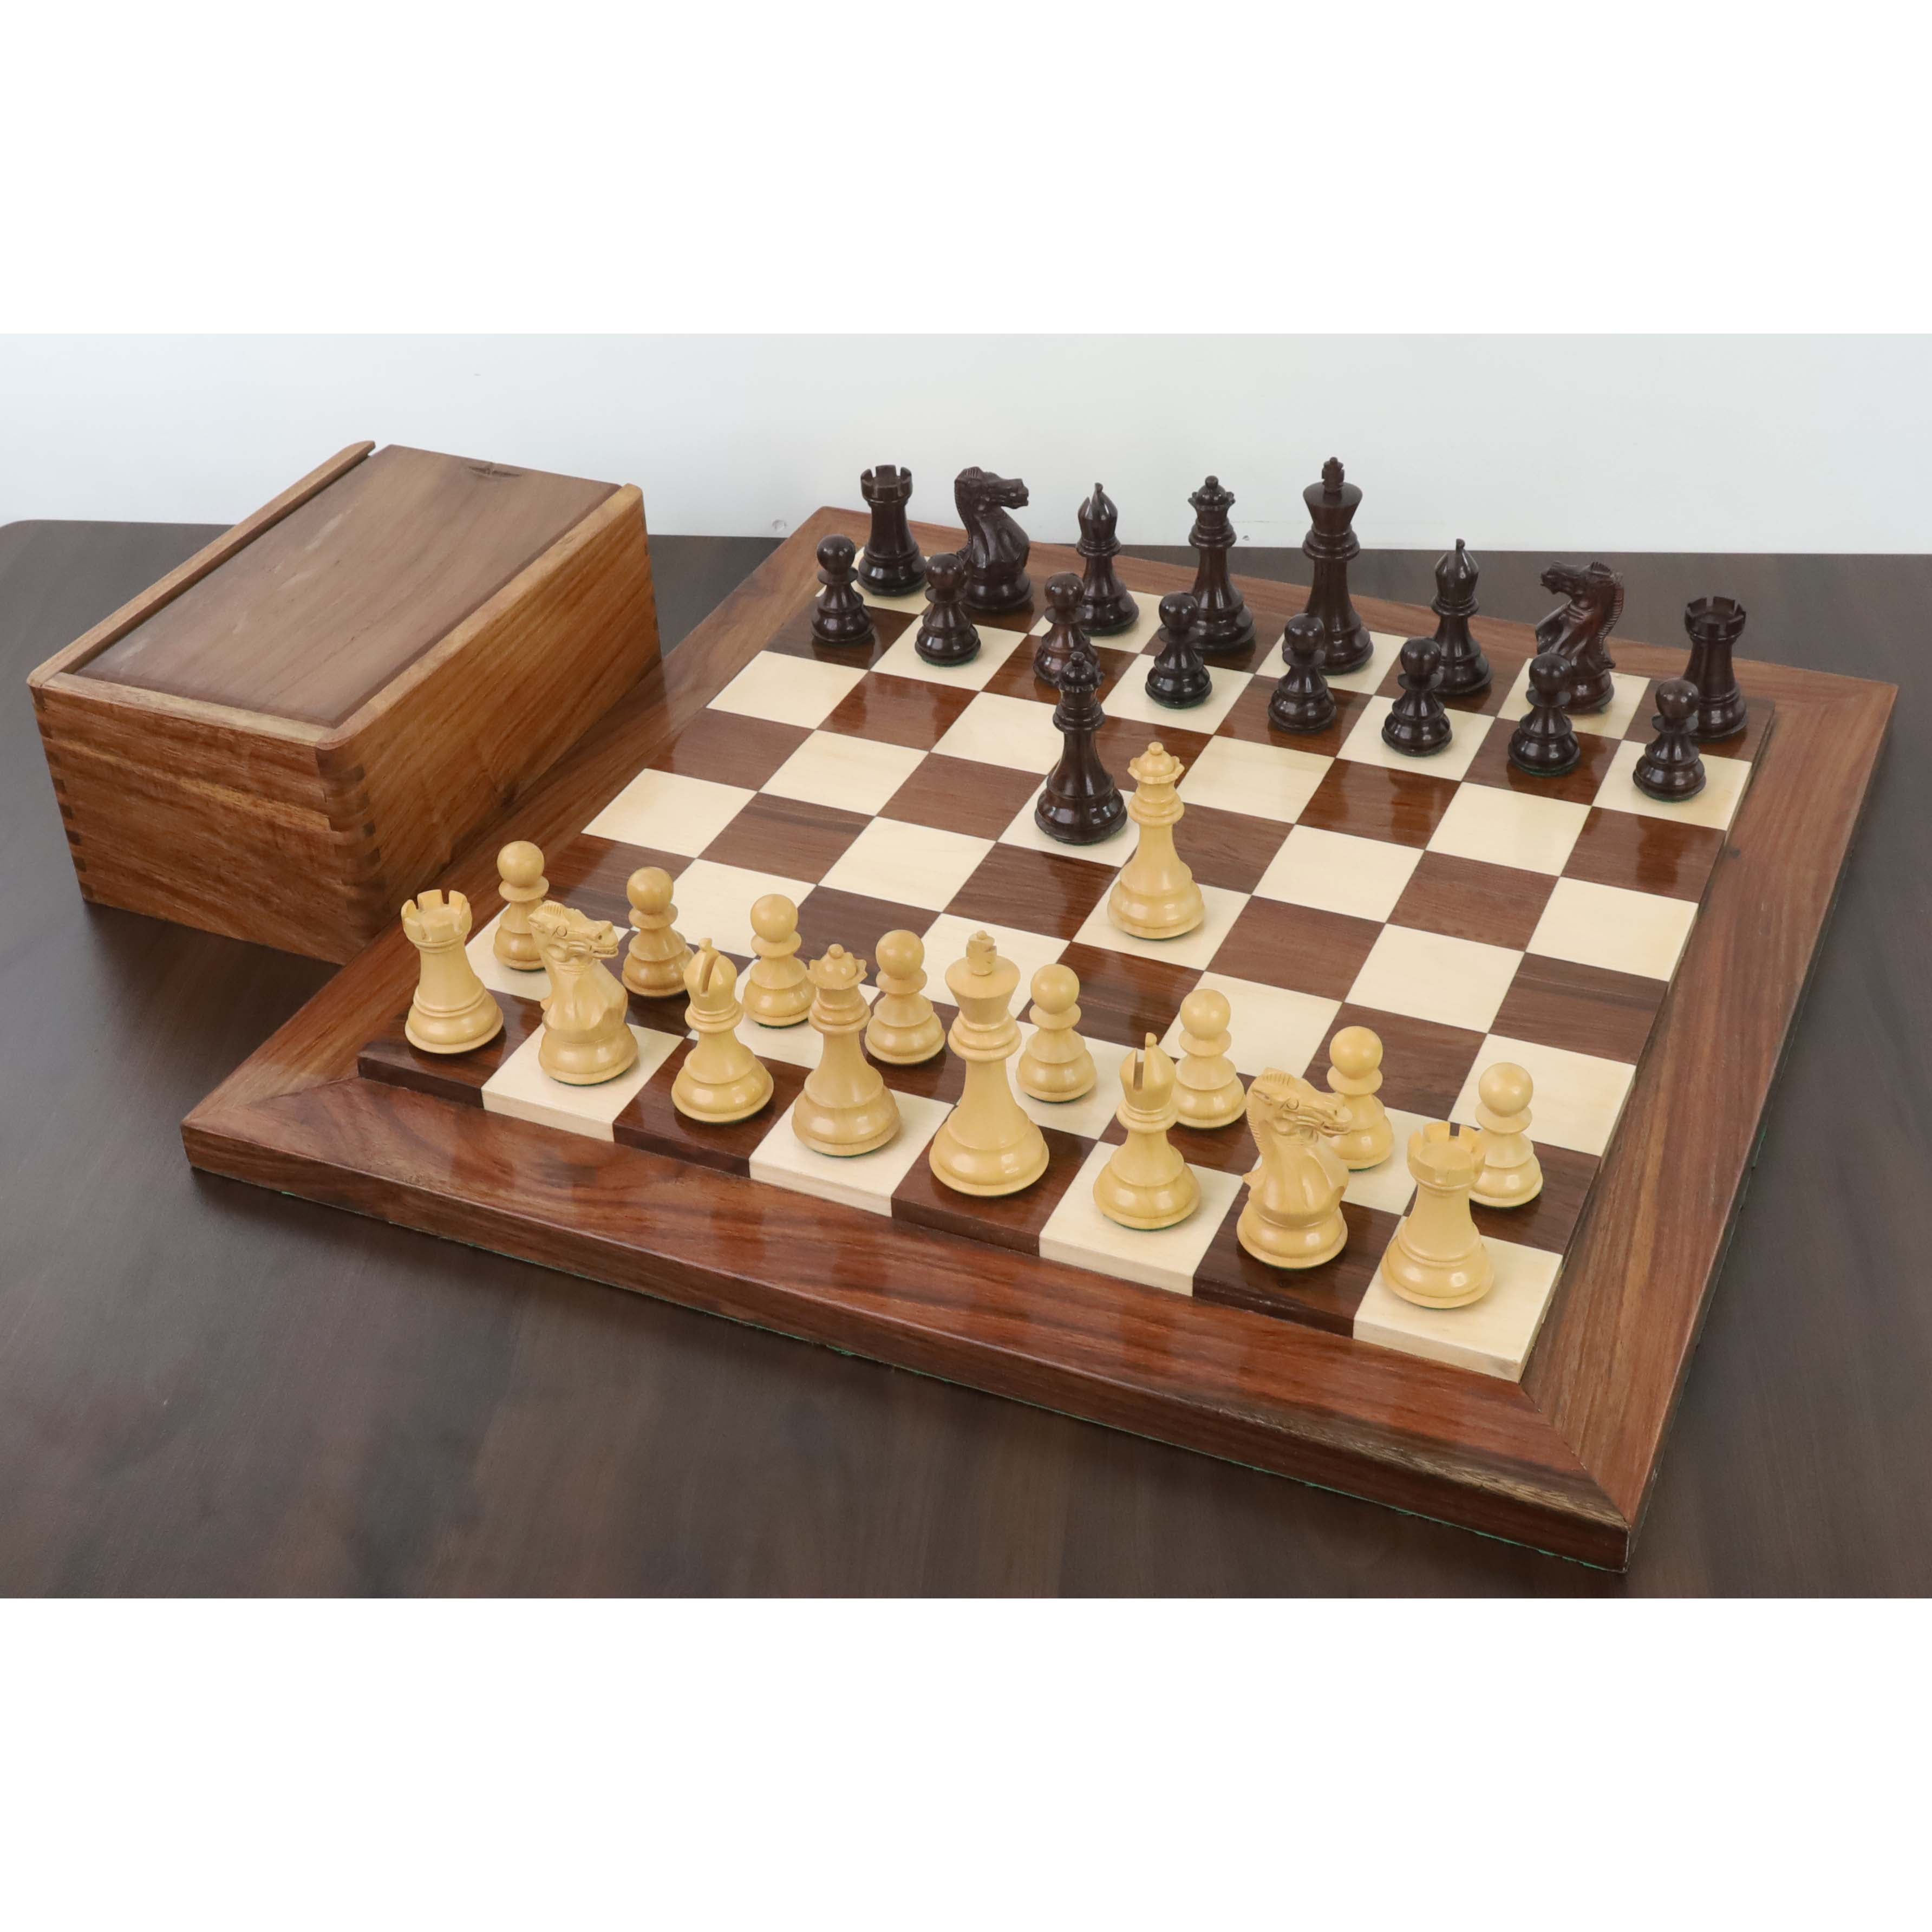 3.9 Parker Staunton Chess Set Chess Pieces Only -  Portugal